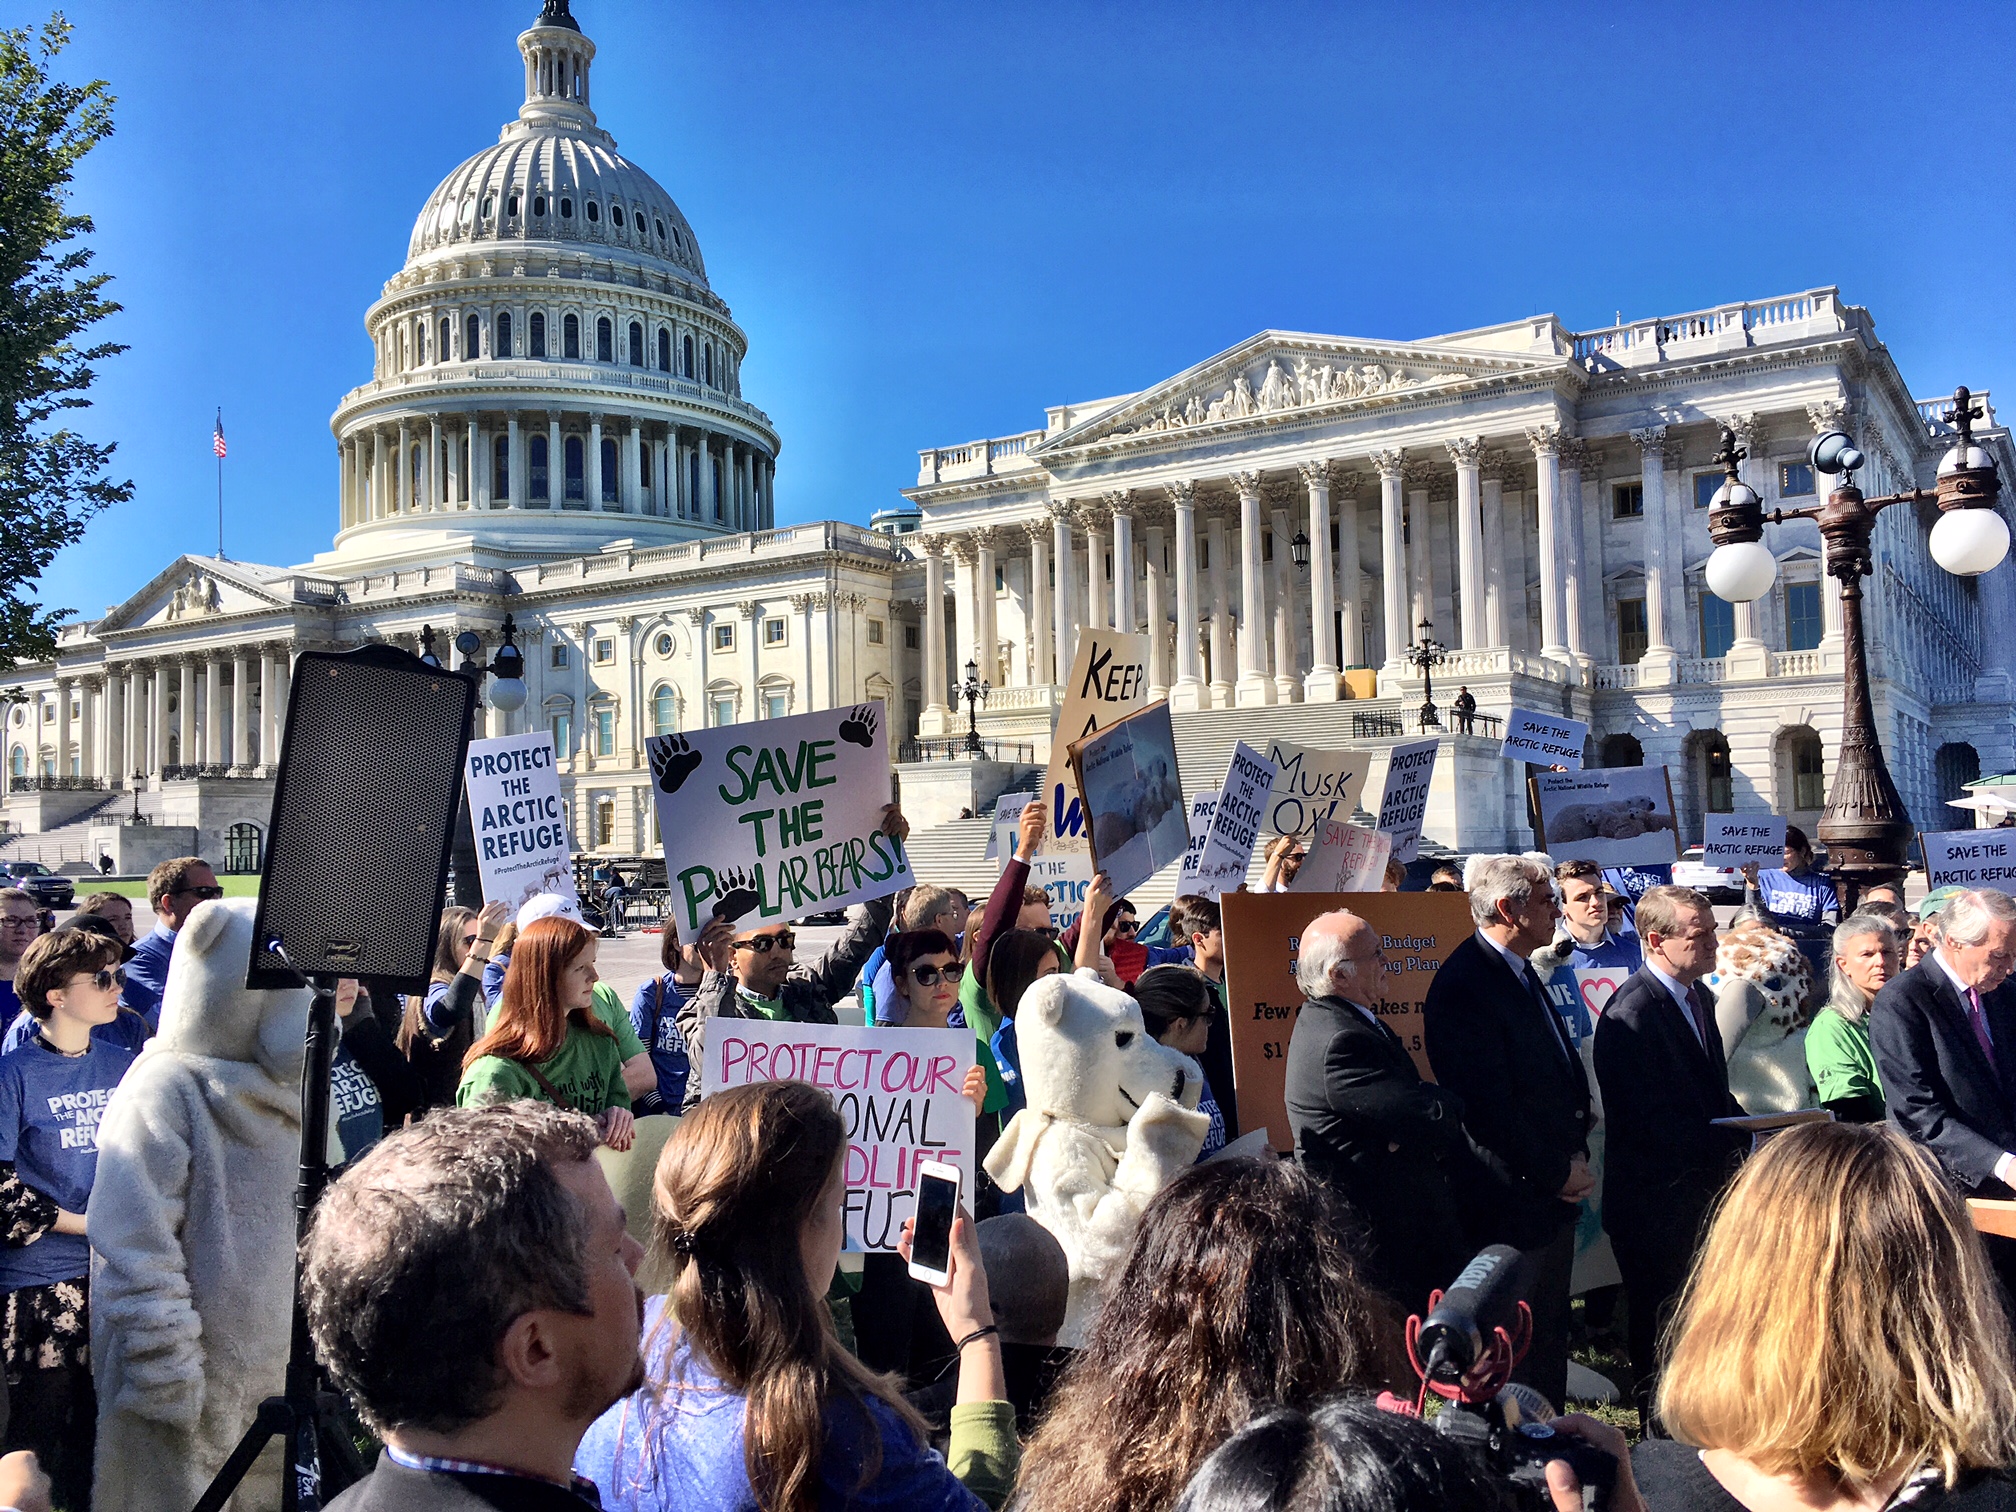 Environmentalists staged a protest in front of the U.S. Senate in October 2017. (Photo by Liz Ruskin/Alaska Public Media)